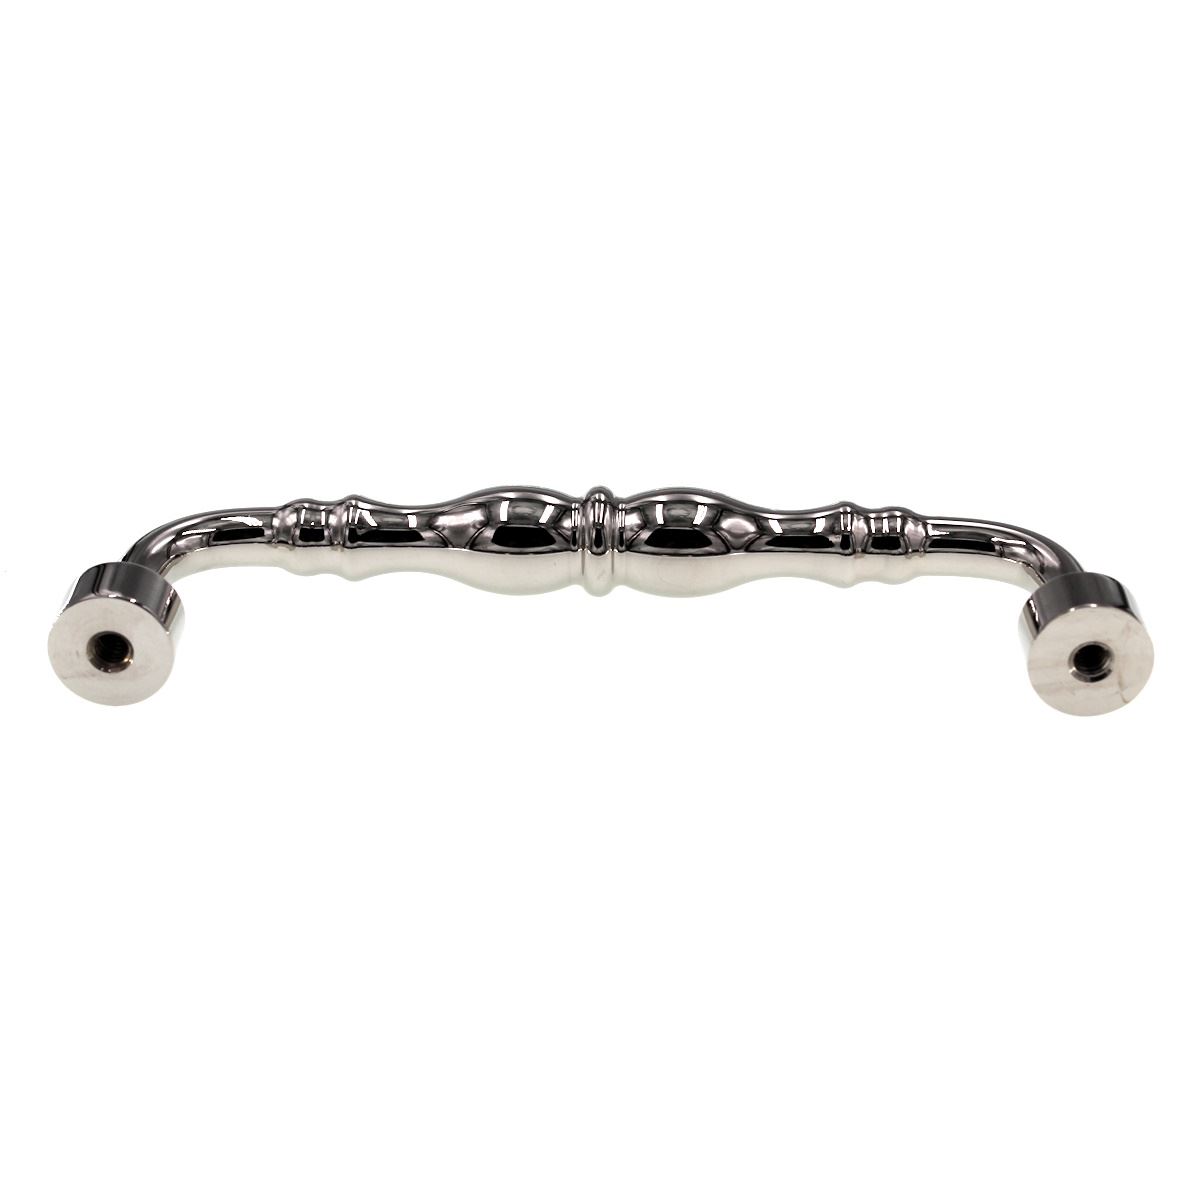 Schaub And Company Colonial Cabinet Arch Pull 6" Ctr Polished Nickel 748-PN